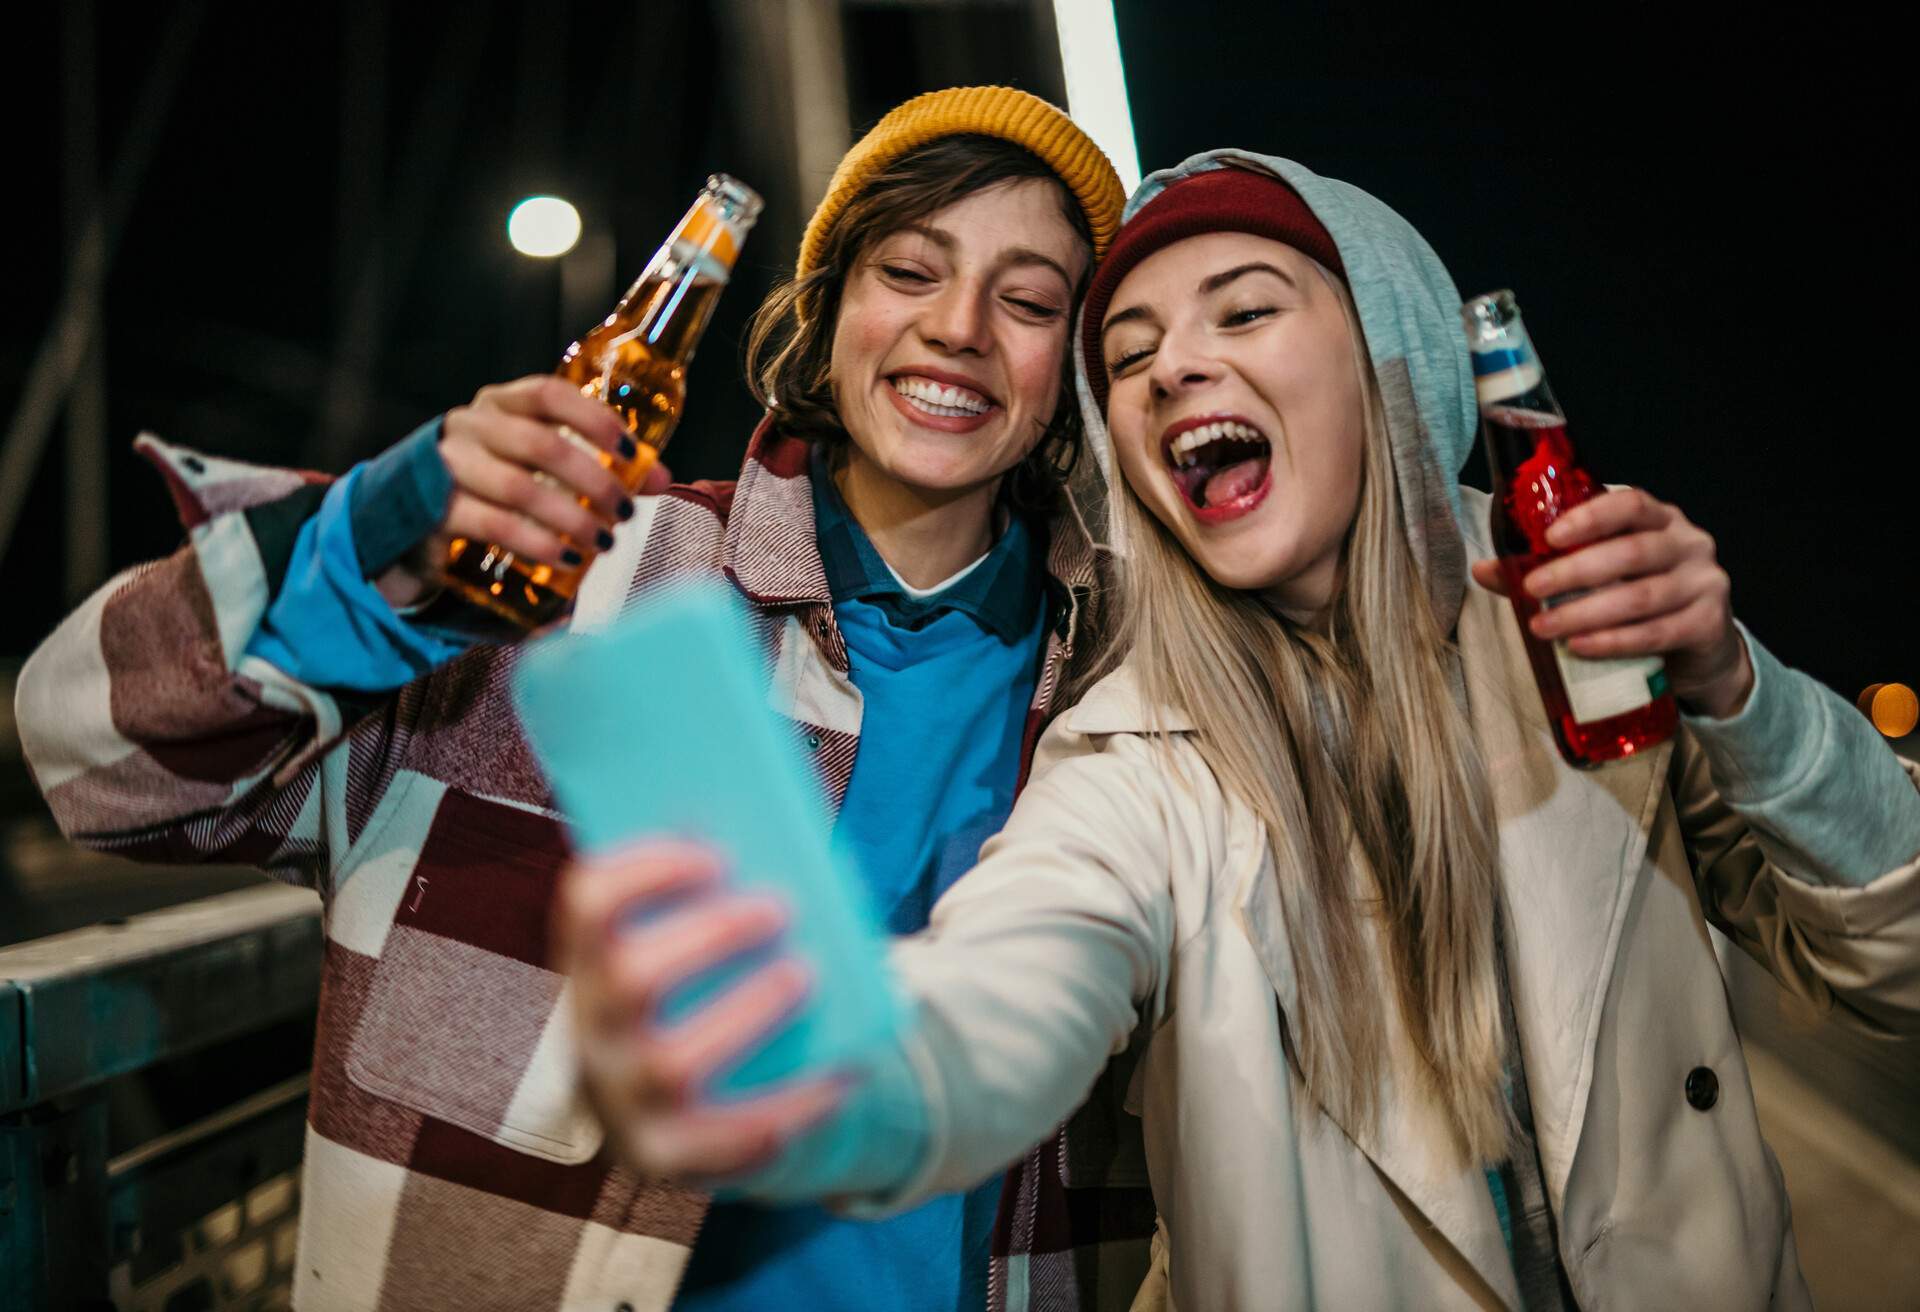 Spontaneous photo of two beautiful, cute women, a brunet and blonde, drinking alcohol, cheering and having fun while taking a selfie, on the street at night.